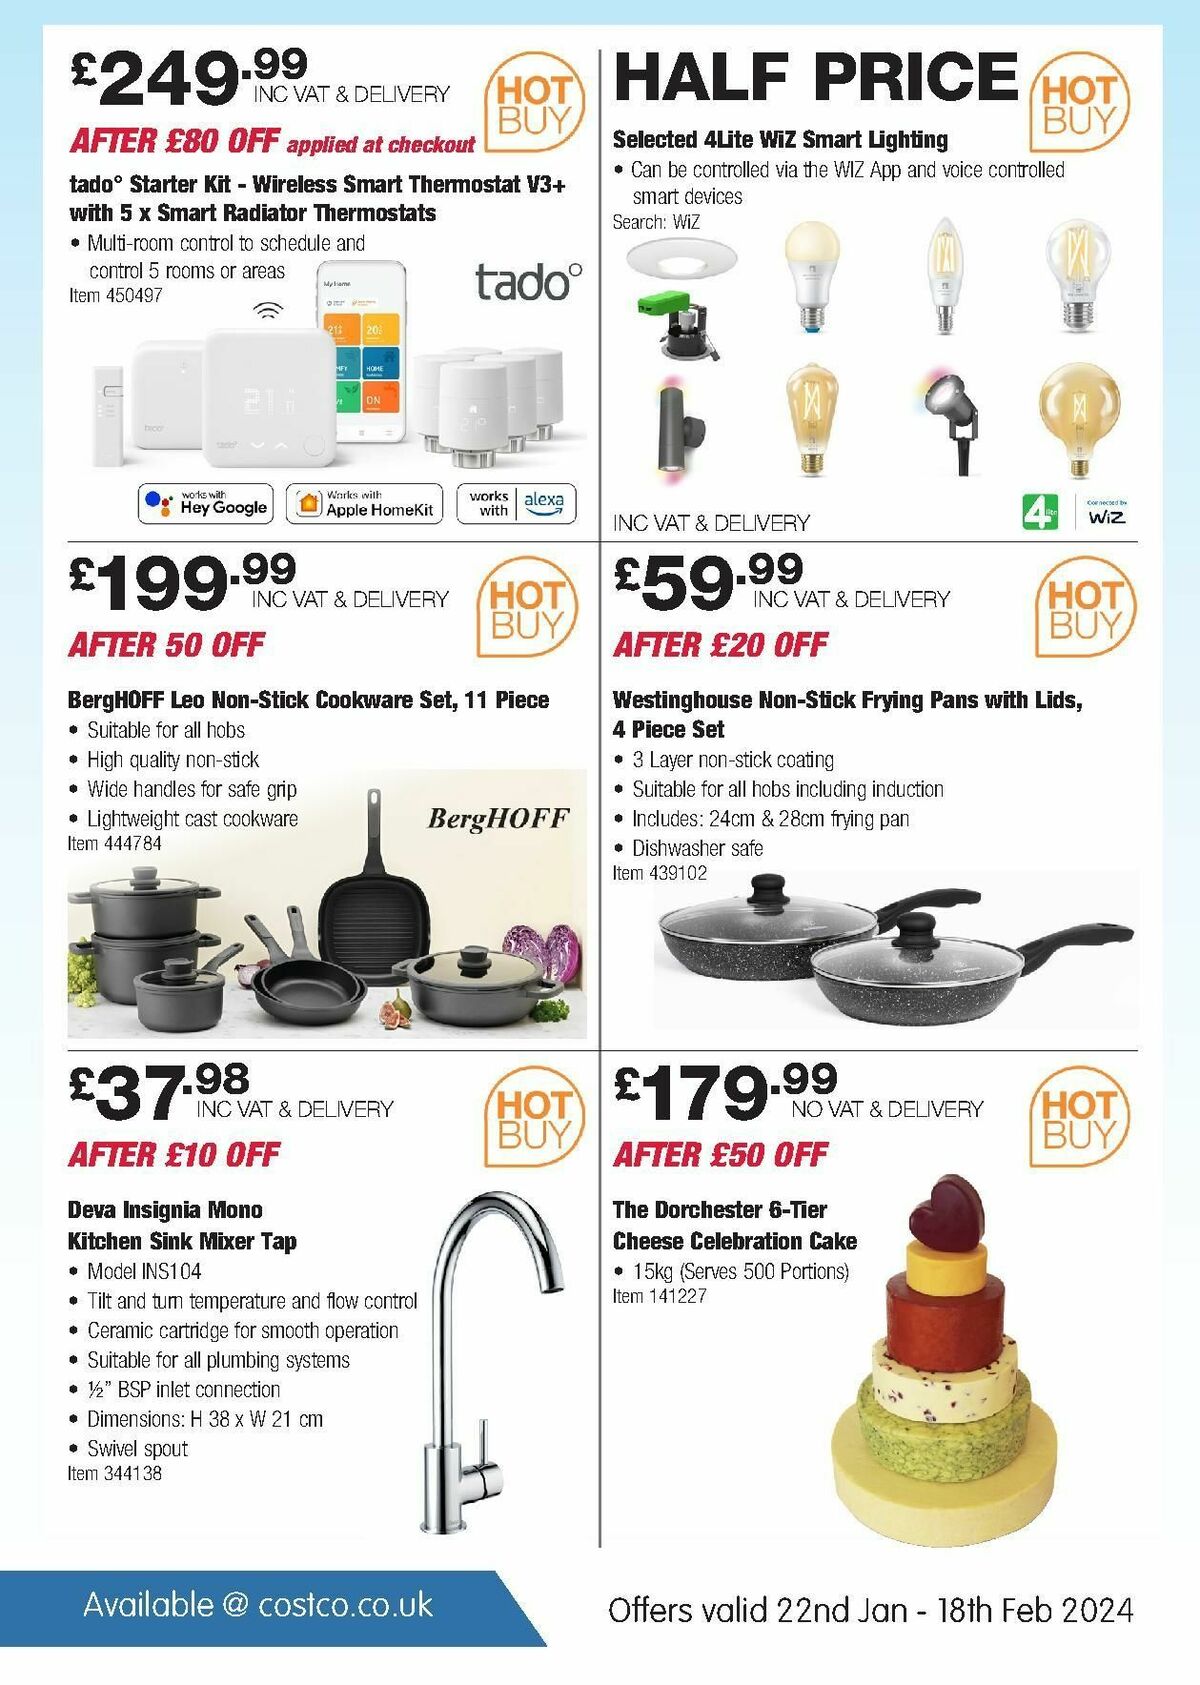 Costco Hot Buys Offers from 22 January